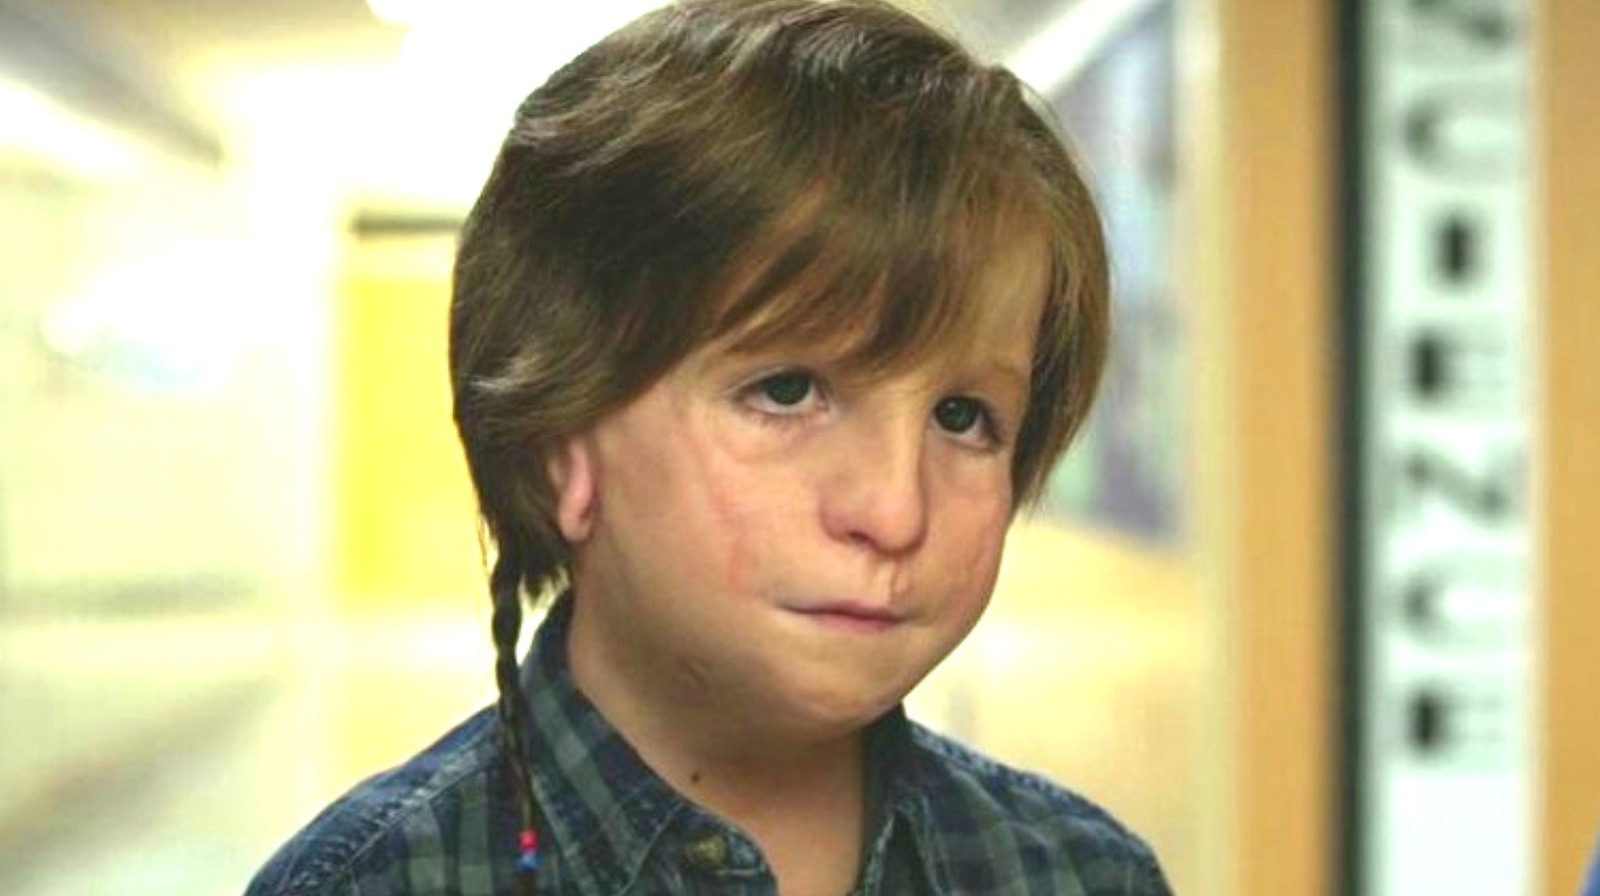 Screenshot of the film wonder, close-up of Auggie's face. Prosthetics have been used to give the actor a facial difference.